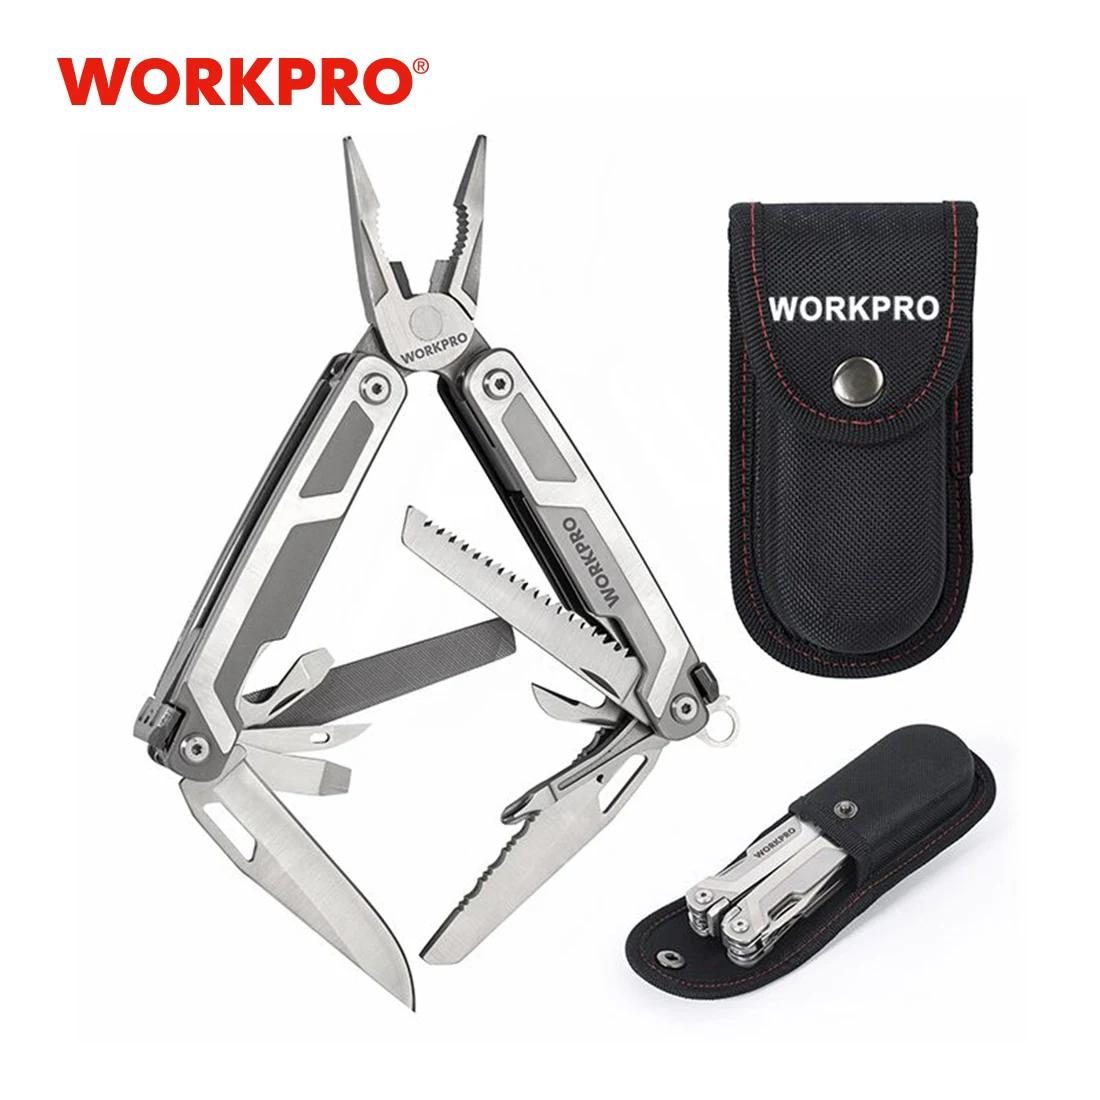 WORKPRO 16 in1 Multi Plier Multifunction Tools with  Scissors Saw Screwdriver - $369.59